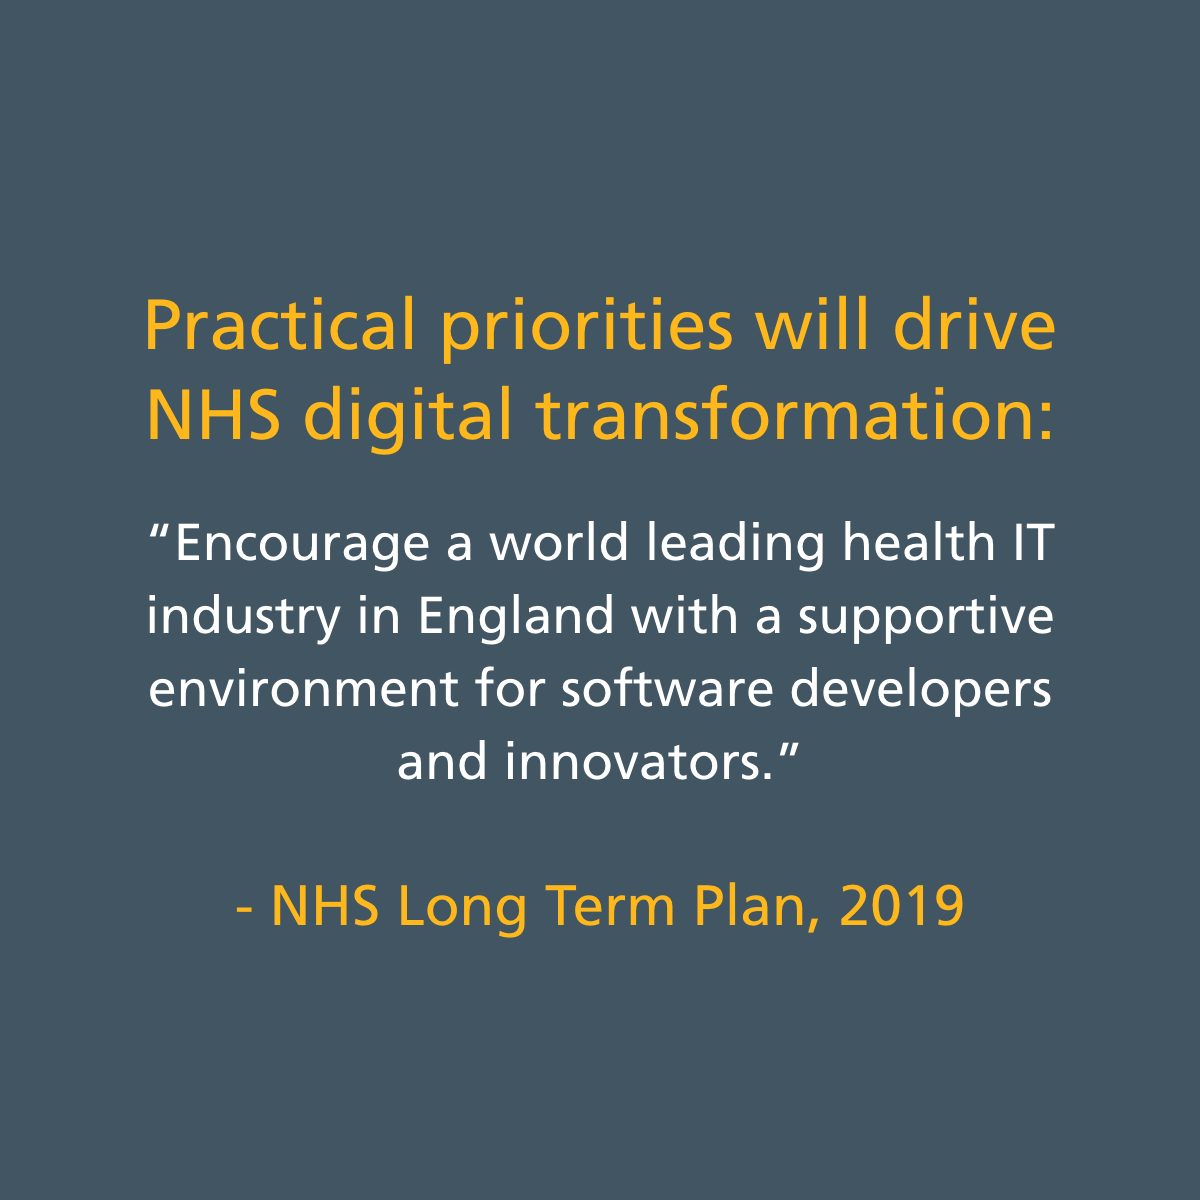 Practical priorities will drive NHS digital transformation: "Encourage a world leading health IT industry in England with a supportive environment for software developers and innovators." - Quote from NHS long term plan